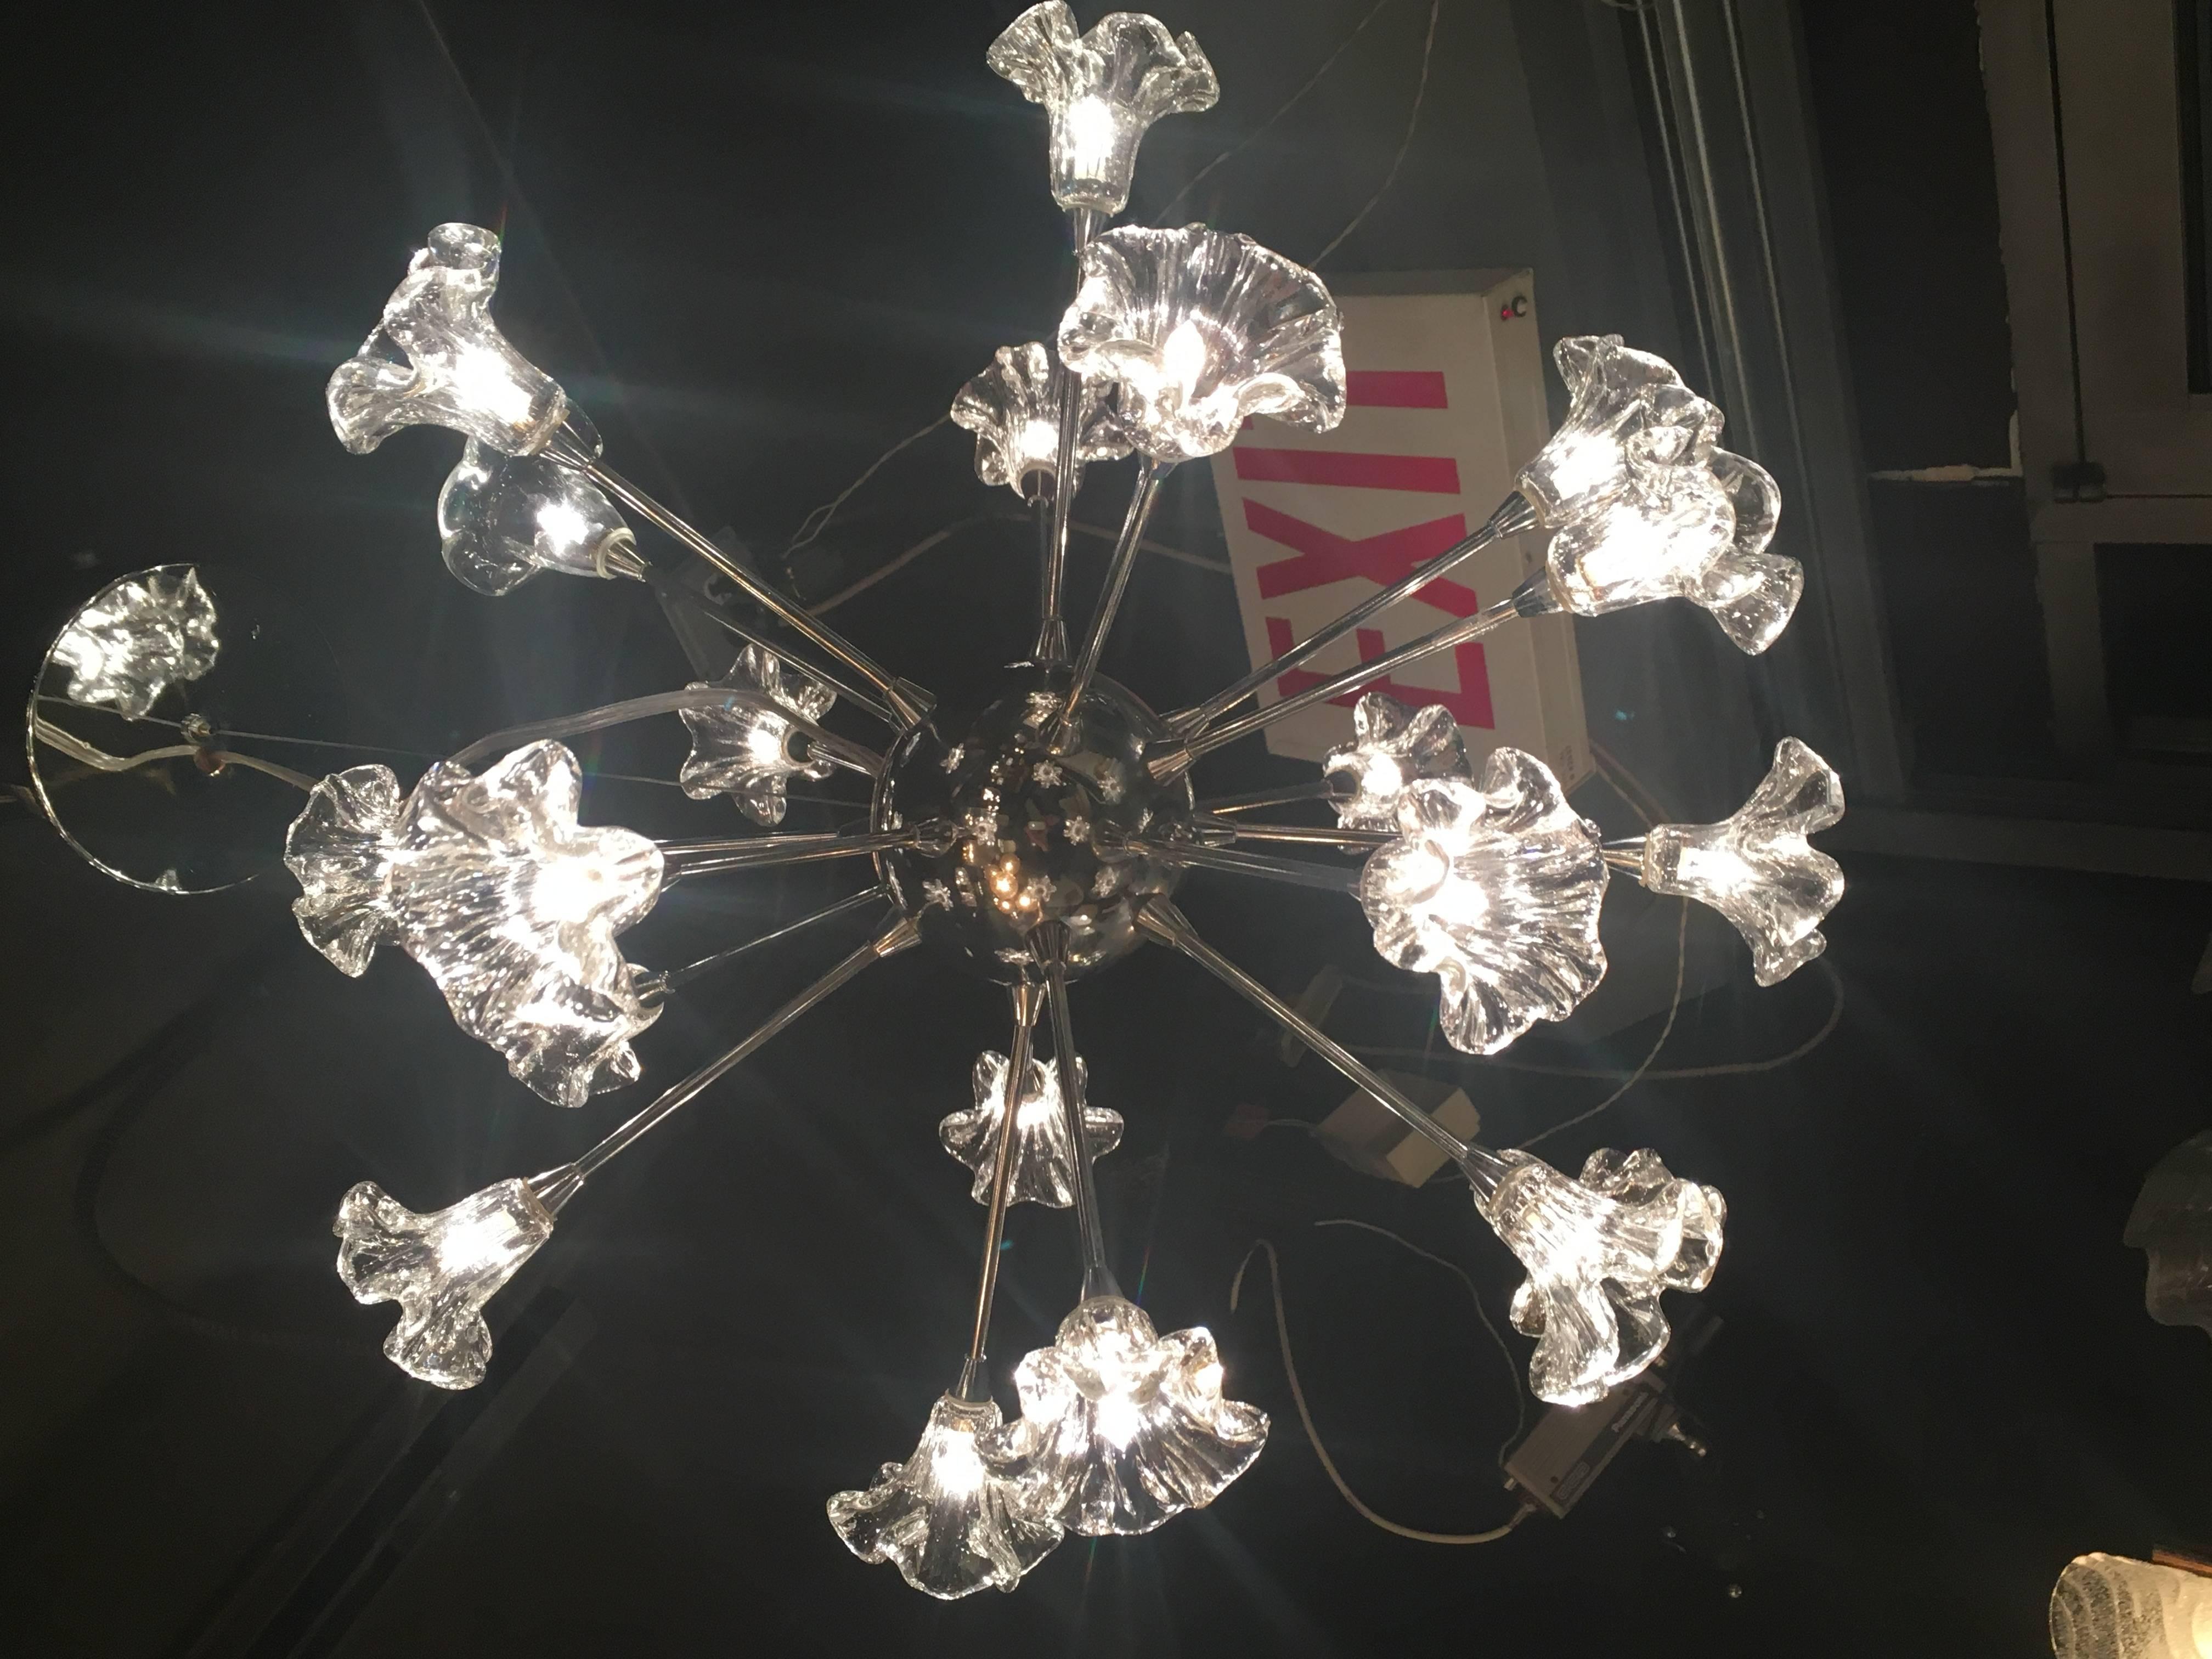 Late 20th Century Mid-Century Modern Sputnik Chandelier with Floral Glass